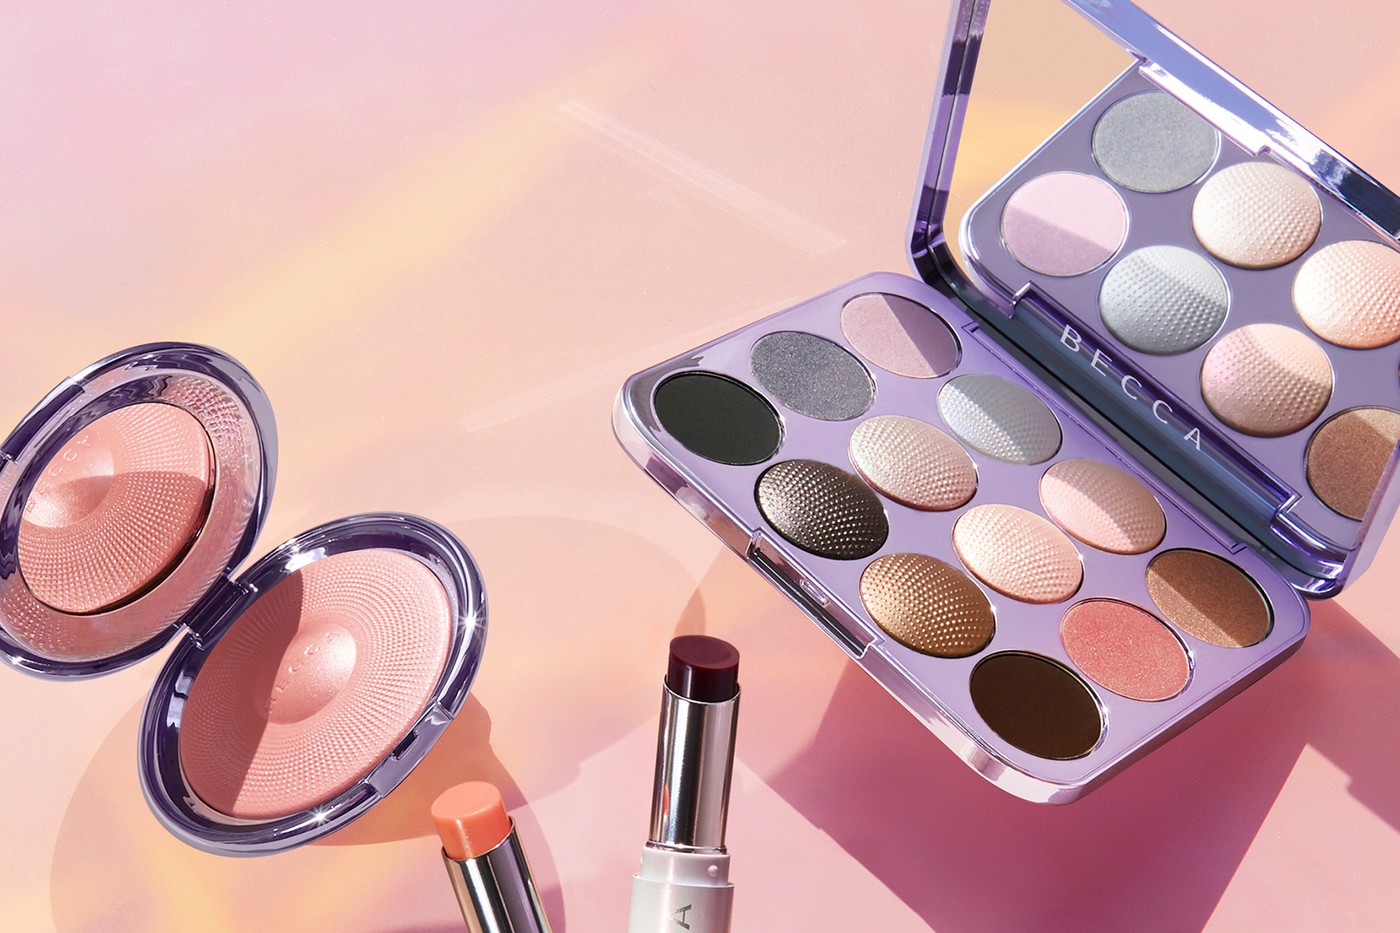 BECCA Pearl Glow Summer 2019 Collection - BECCA Pearl Glow Summer 2019 Collection